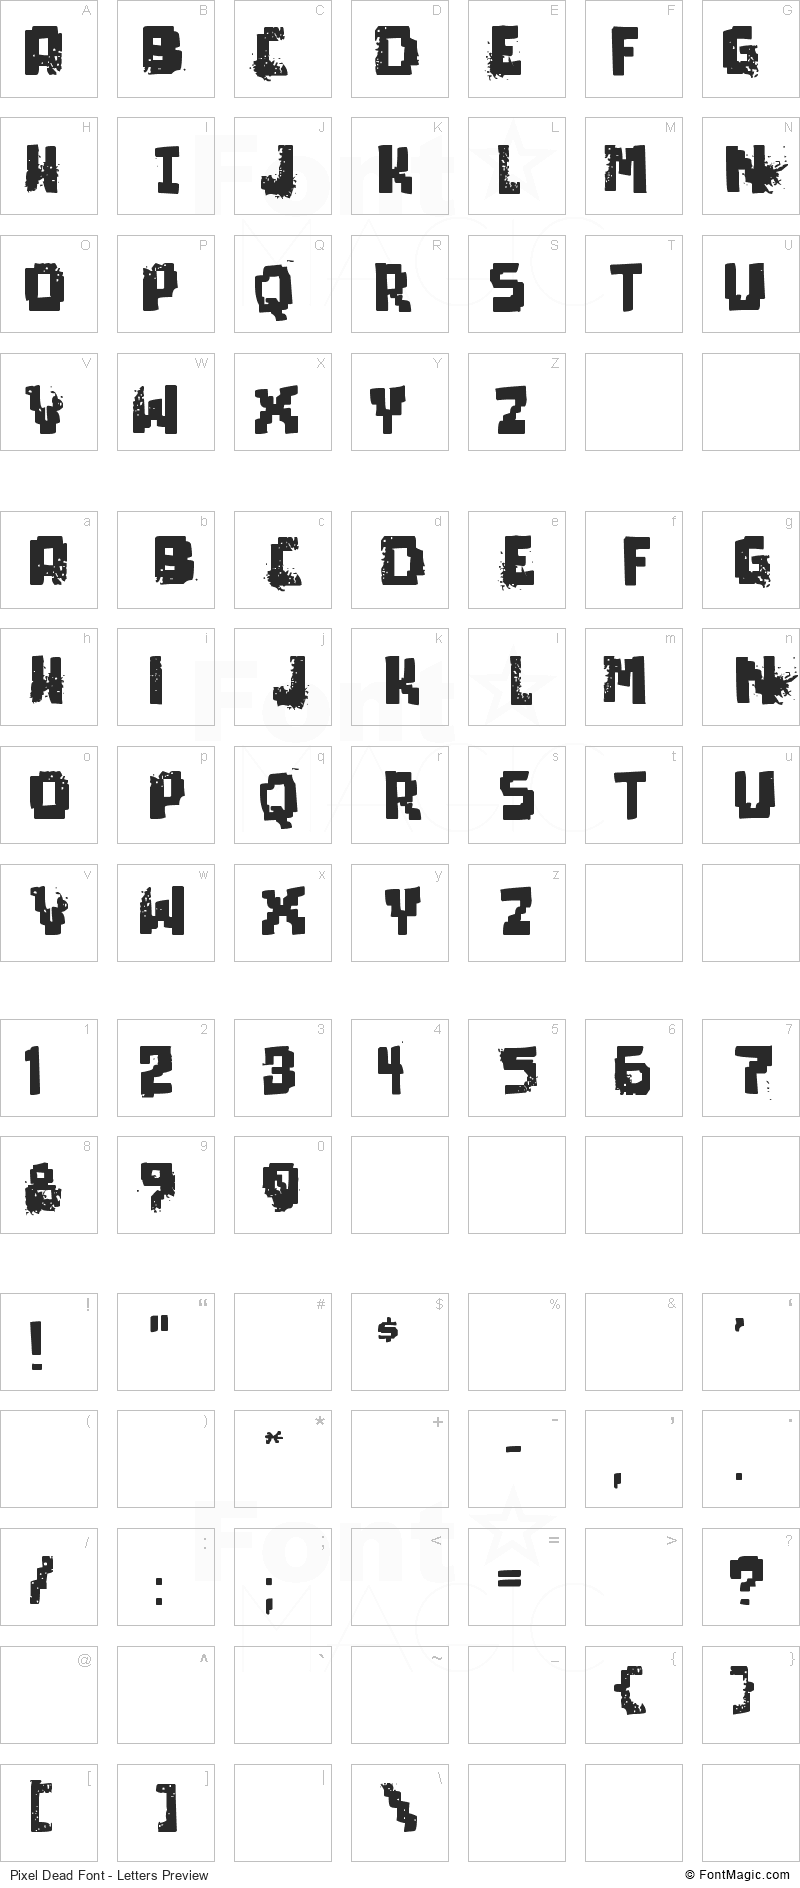 Pixel Dead Font - All Latters Preview Chart